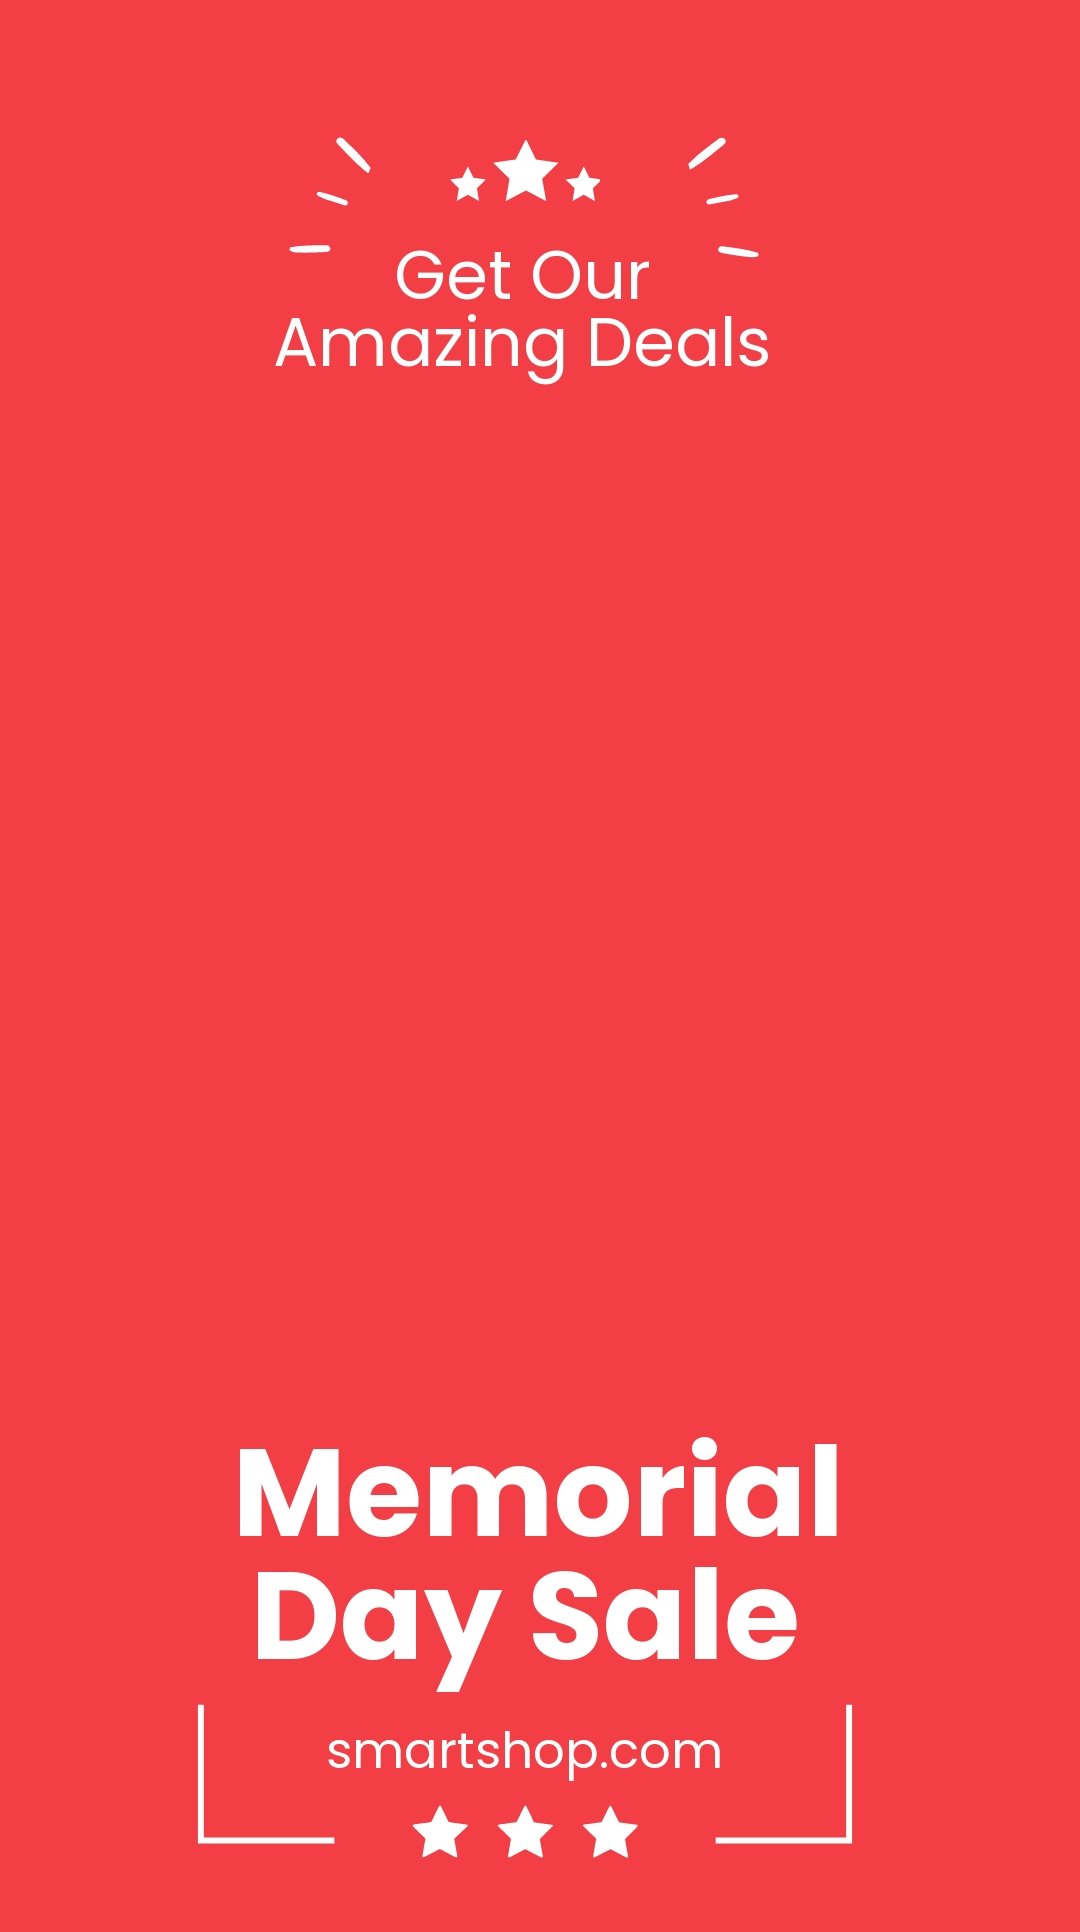 Memorial Day Sale Snapchat Geofilter Template.jpe